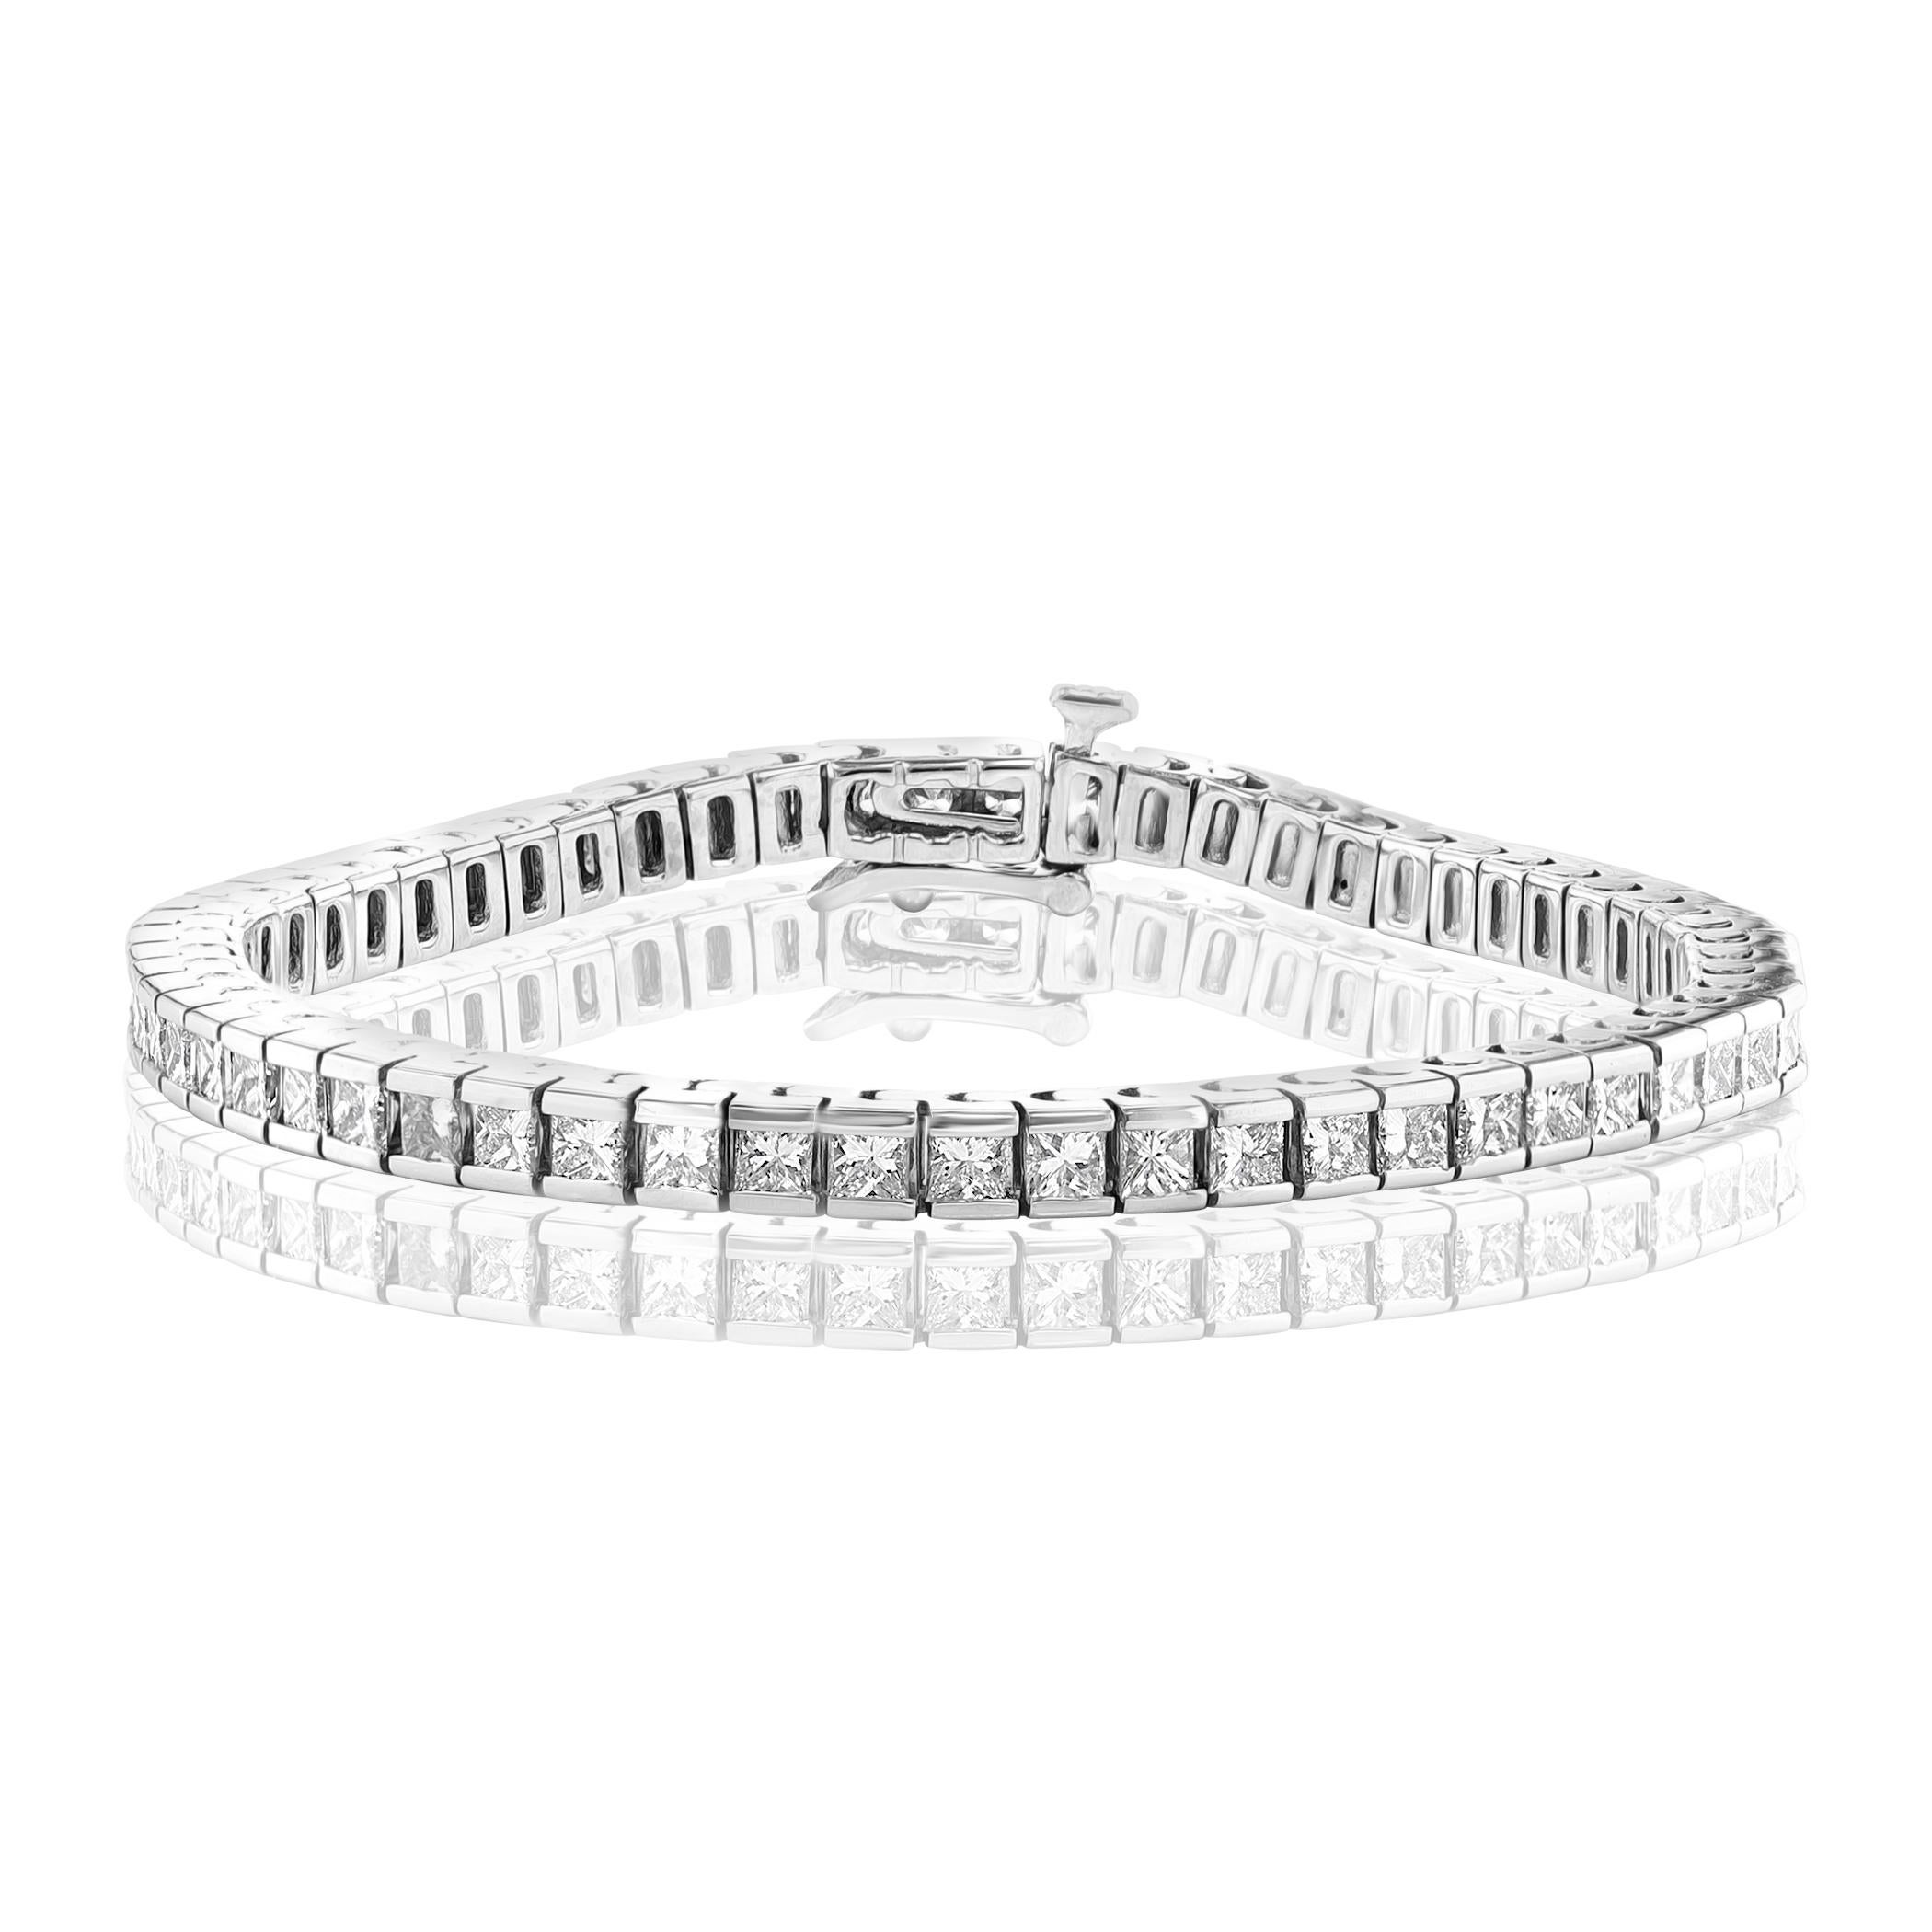 Showcasing princess cut diamonds that are elegantly set in 14k white gold—finished with milgrain edges for an antique look and feel. Diamonds weigh 5.25 carats total.

Style is available in different price ranges. Prices are based on your selection.